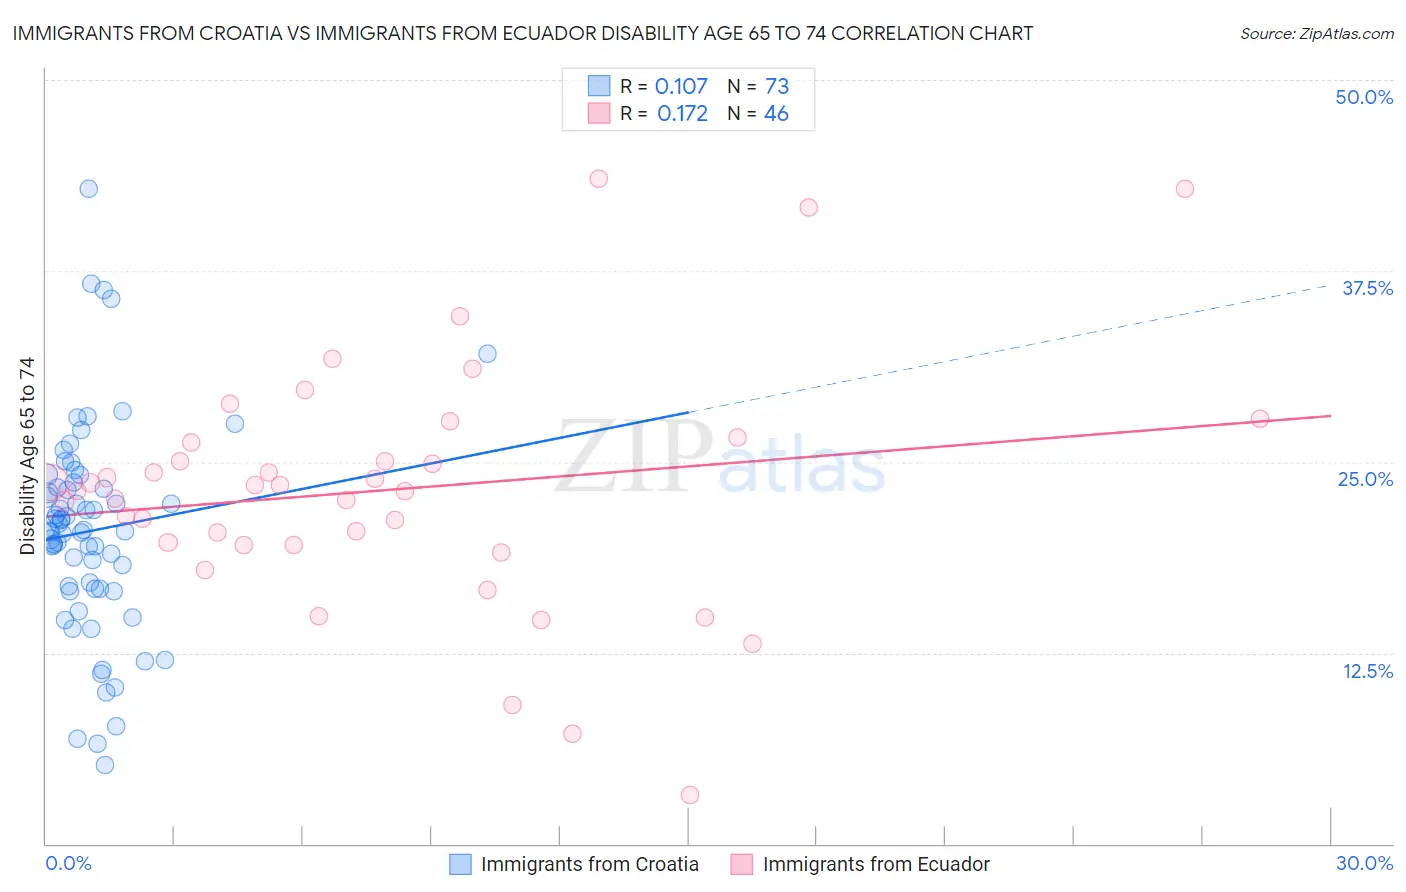 Immigrants from Croatia vs Immigrants from Ecuador Disability Age 65 to 74